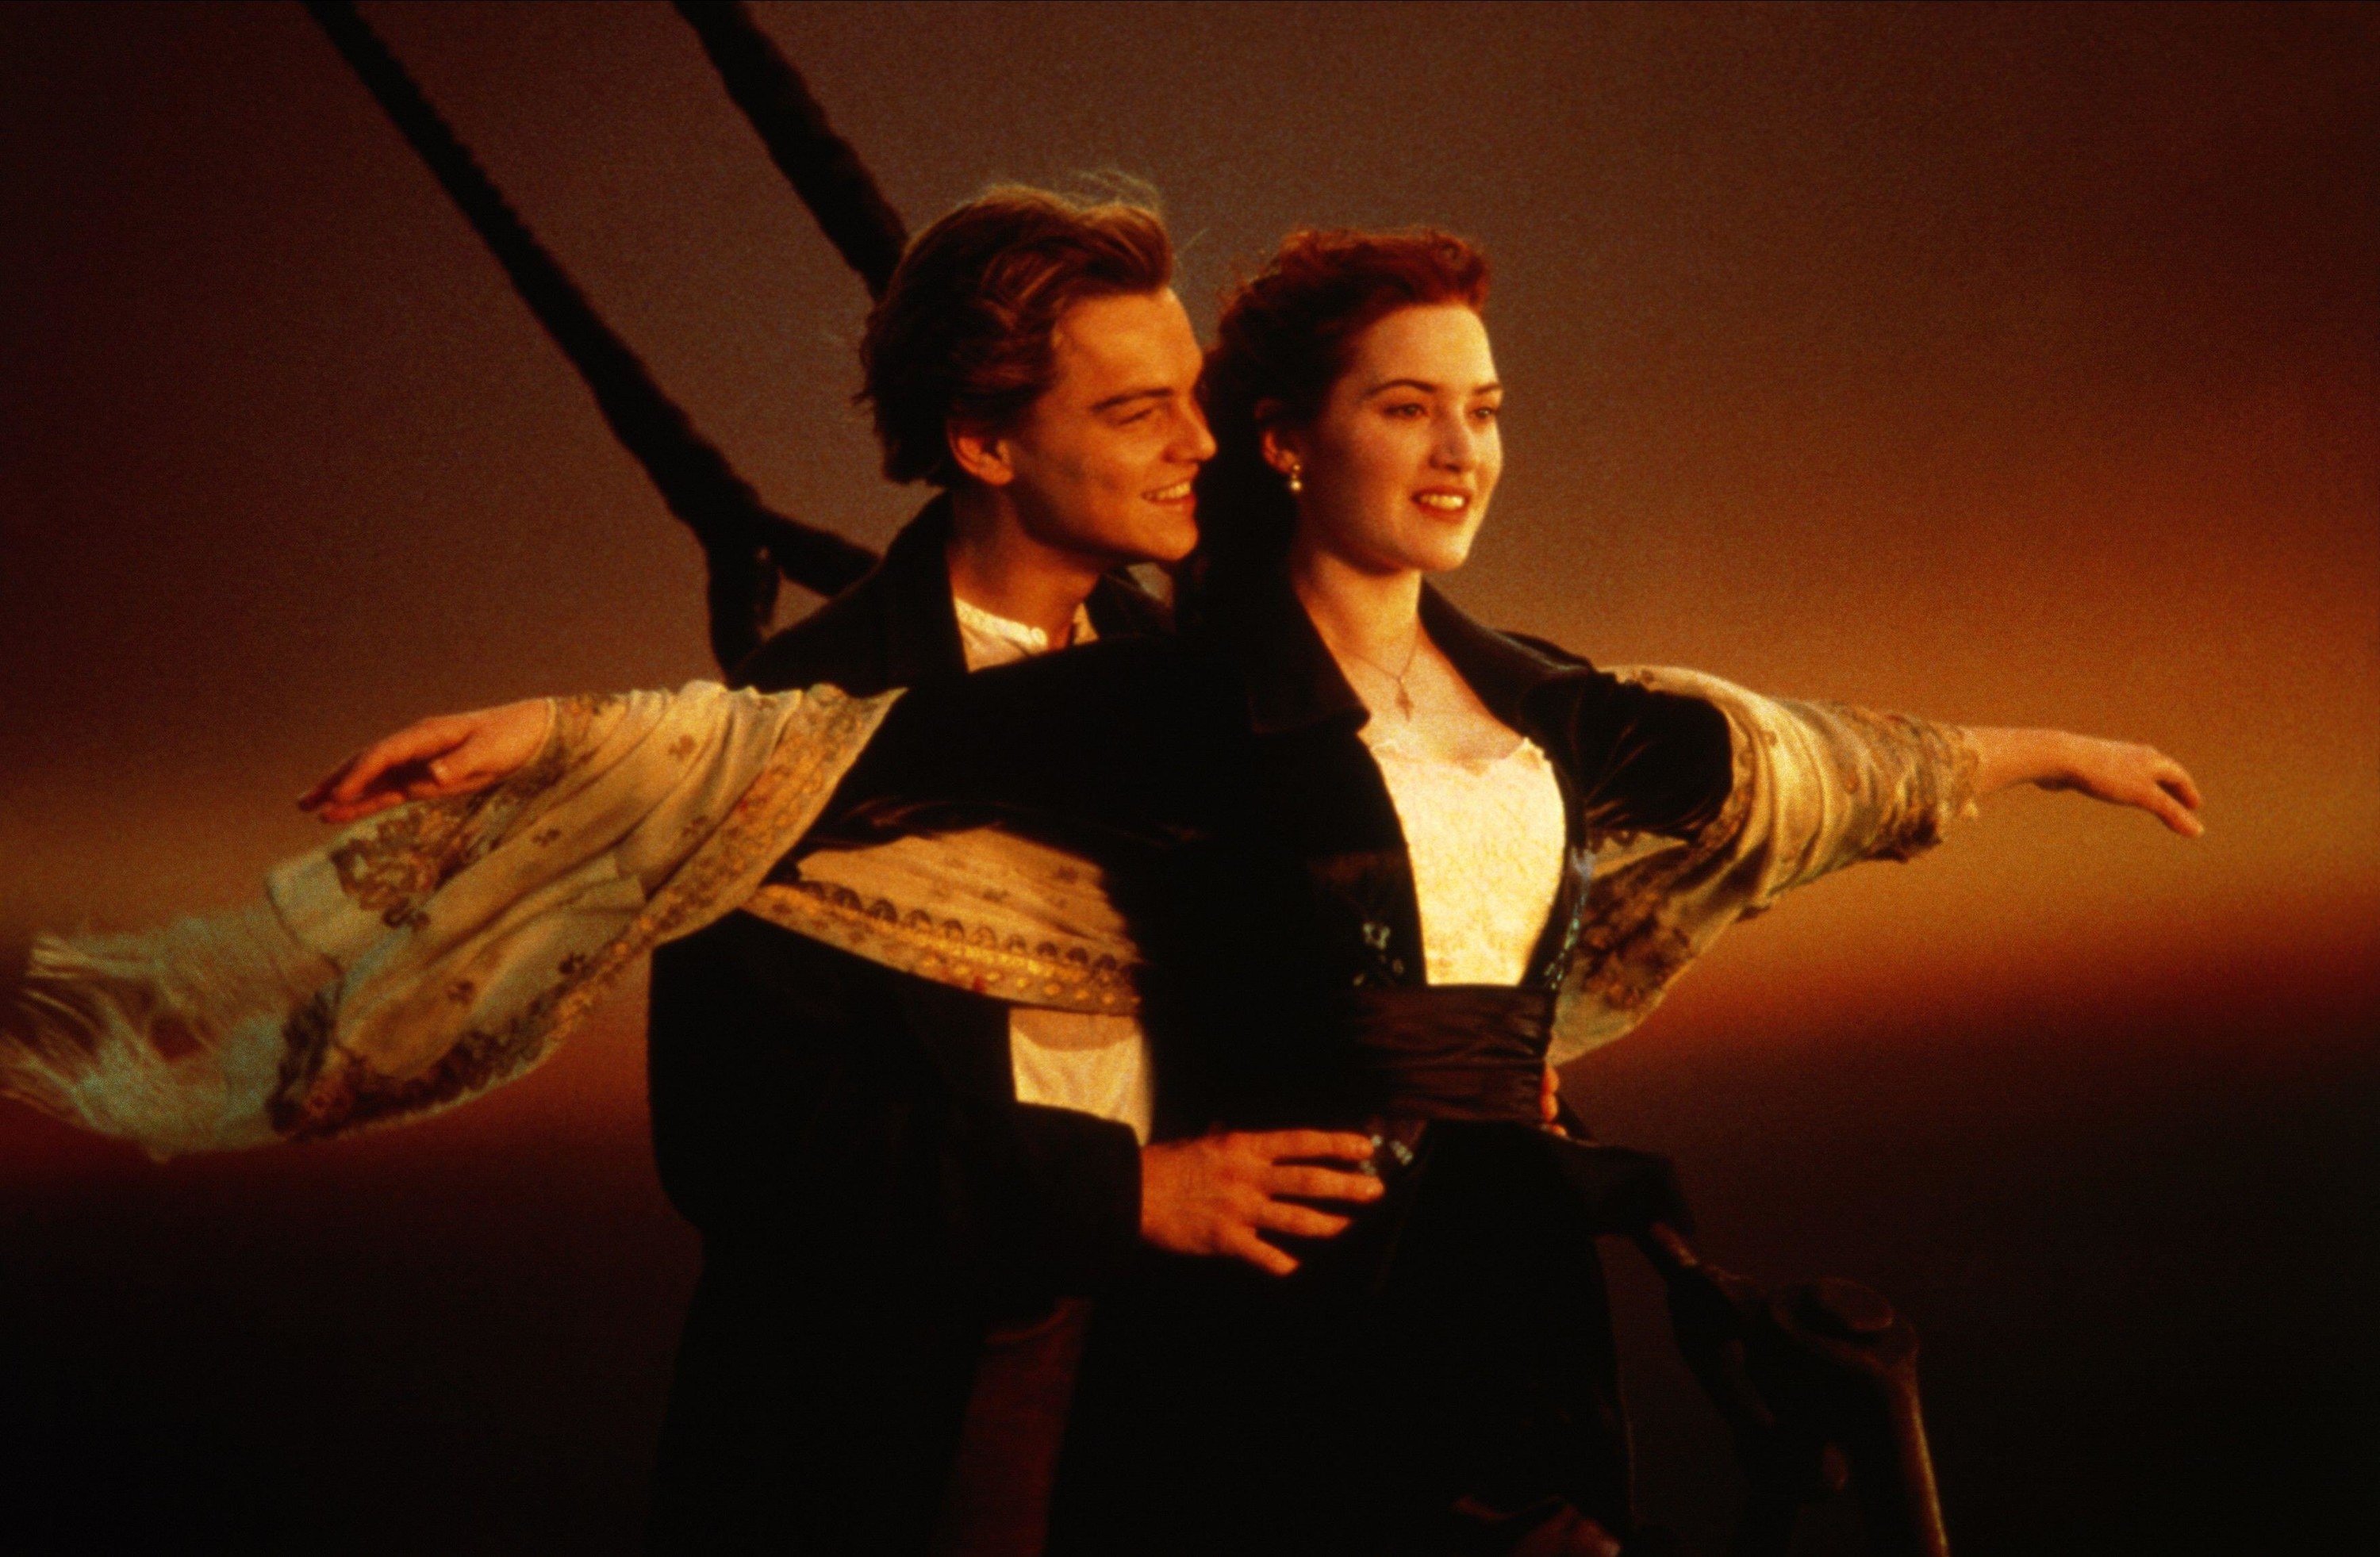 Leonardo DiCaprio and Kate Winslet stand on the front of The Titanic for the iconic &quot;I&#x27;m Flying&quot; scene